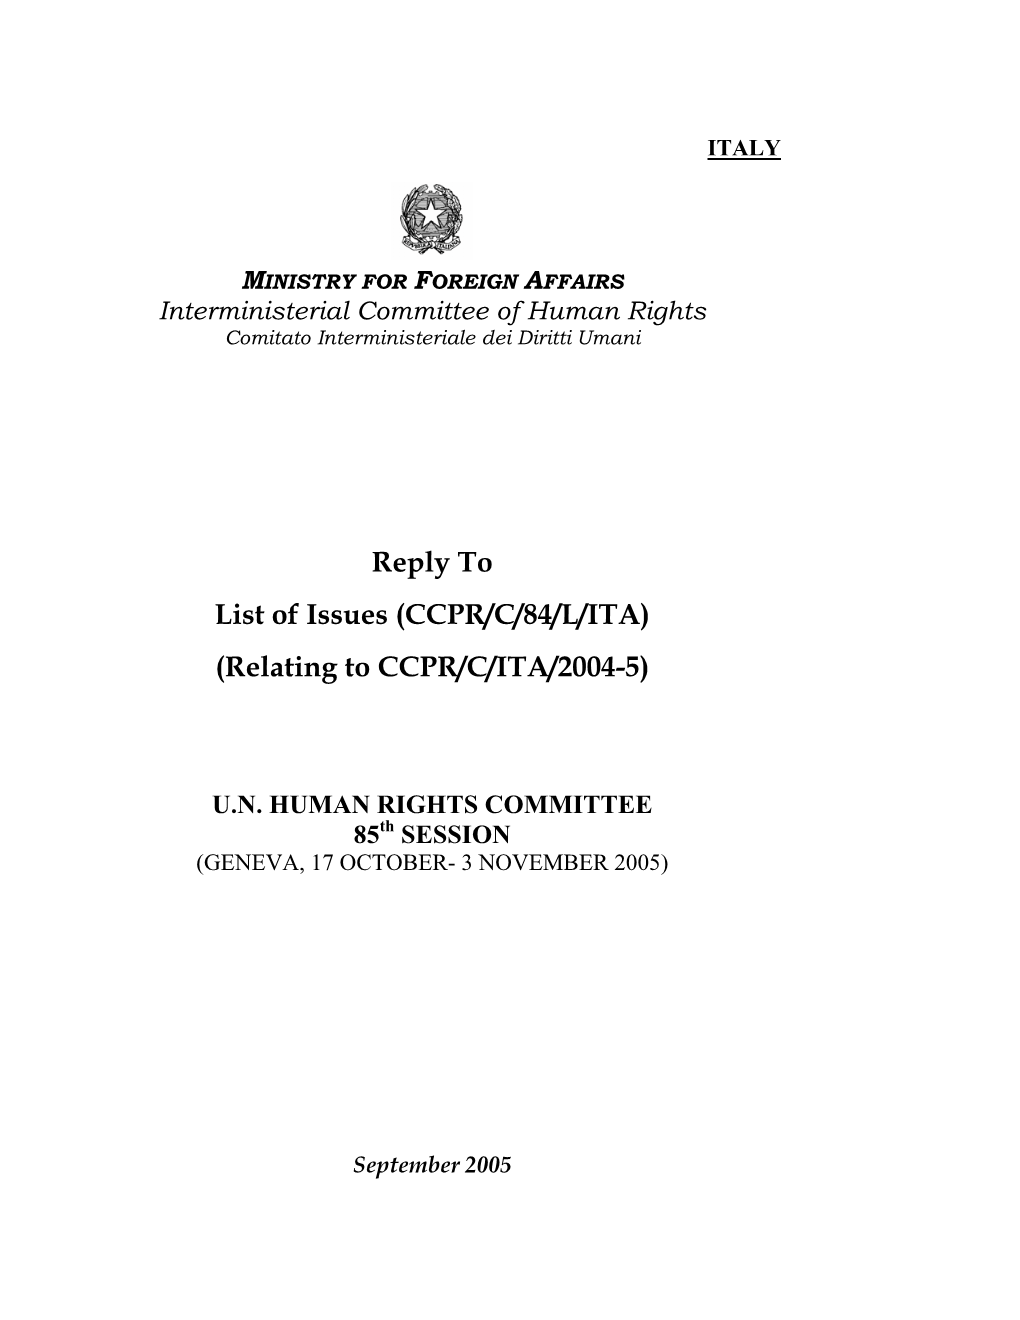 Reply to List of Issues (CCPR/C/84/L/ITA) (Relating to CCPR/C/ITA/2004-5)